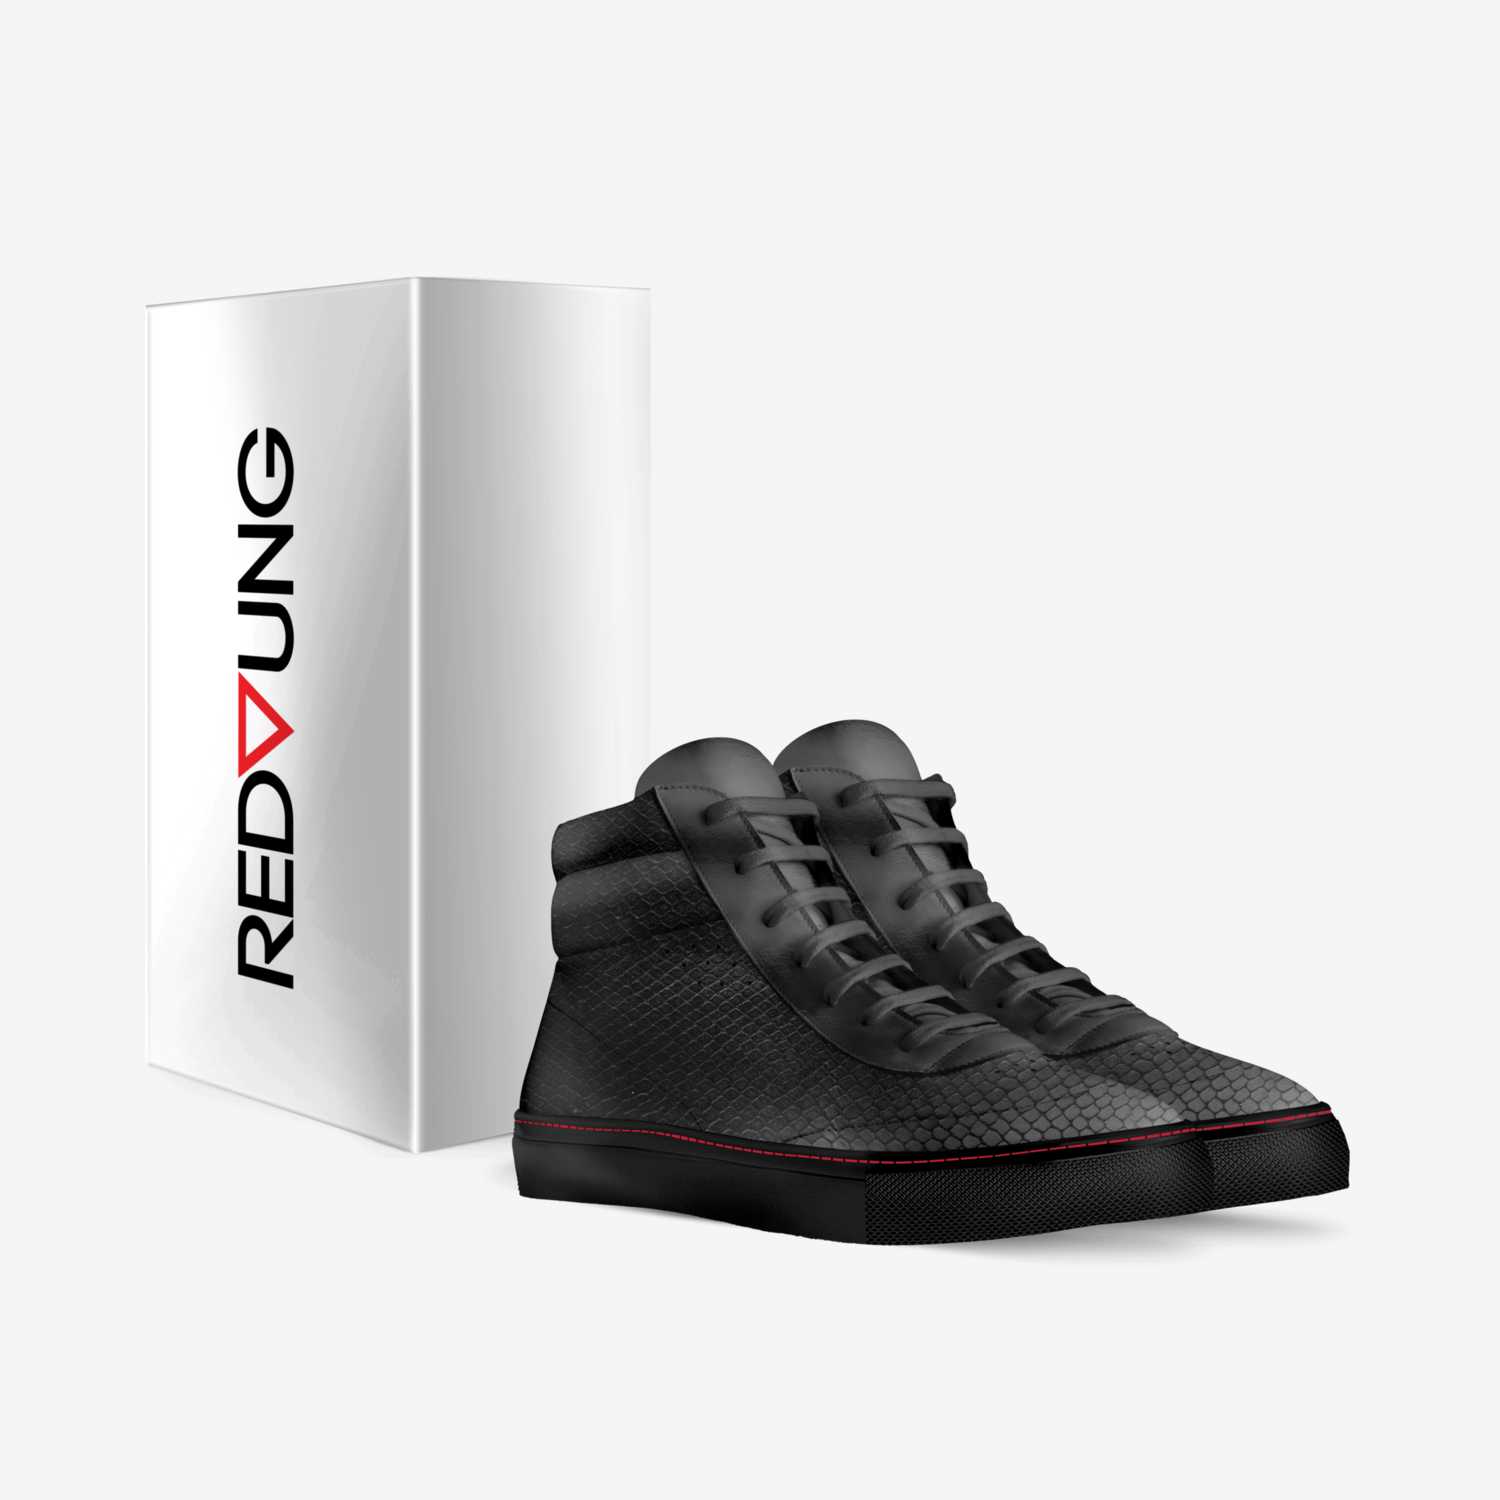 Rogue Red custom made in Italy shoes by Shaughn Angelo | Box view